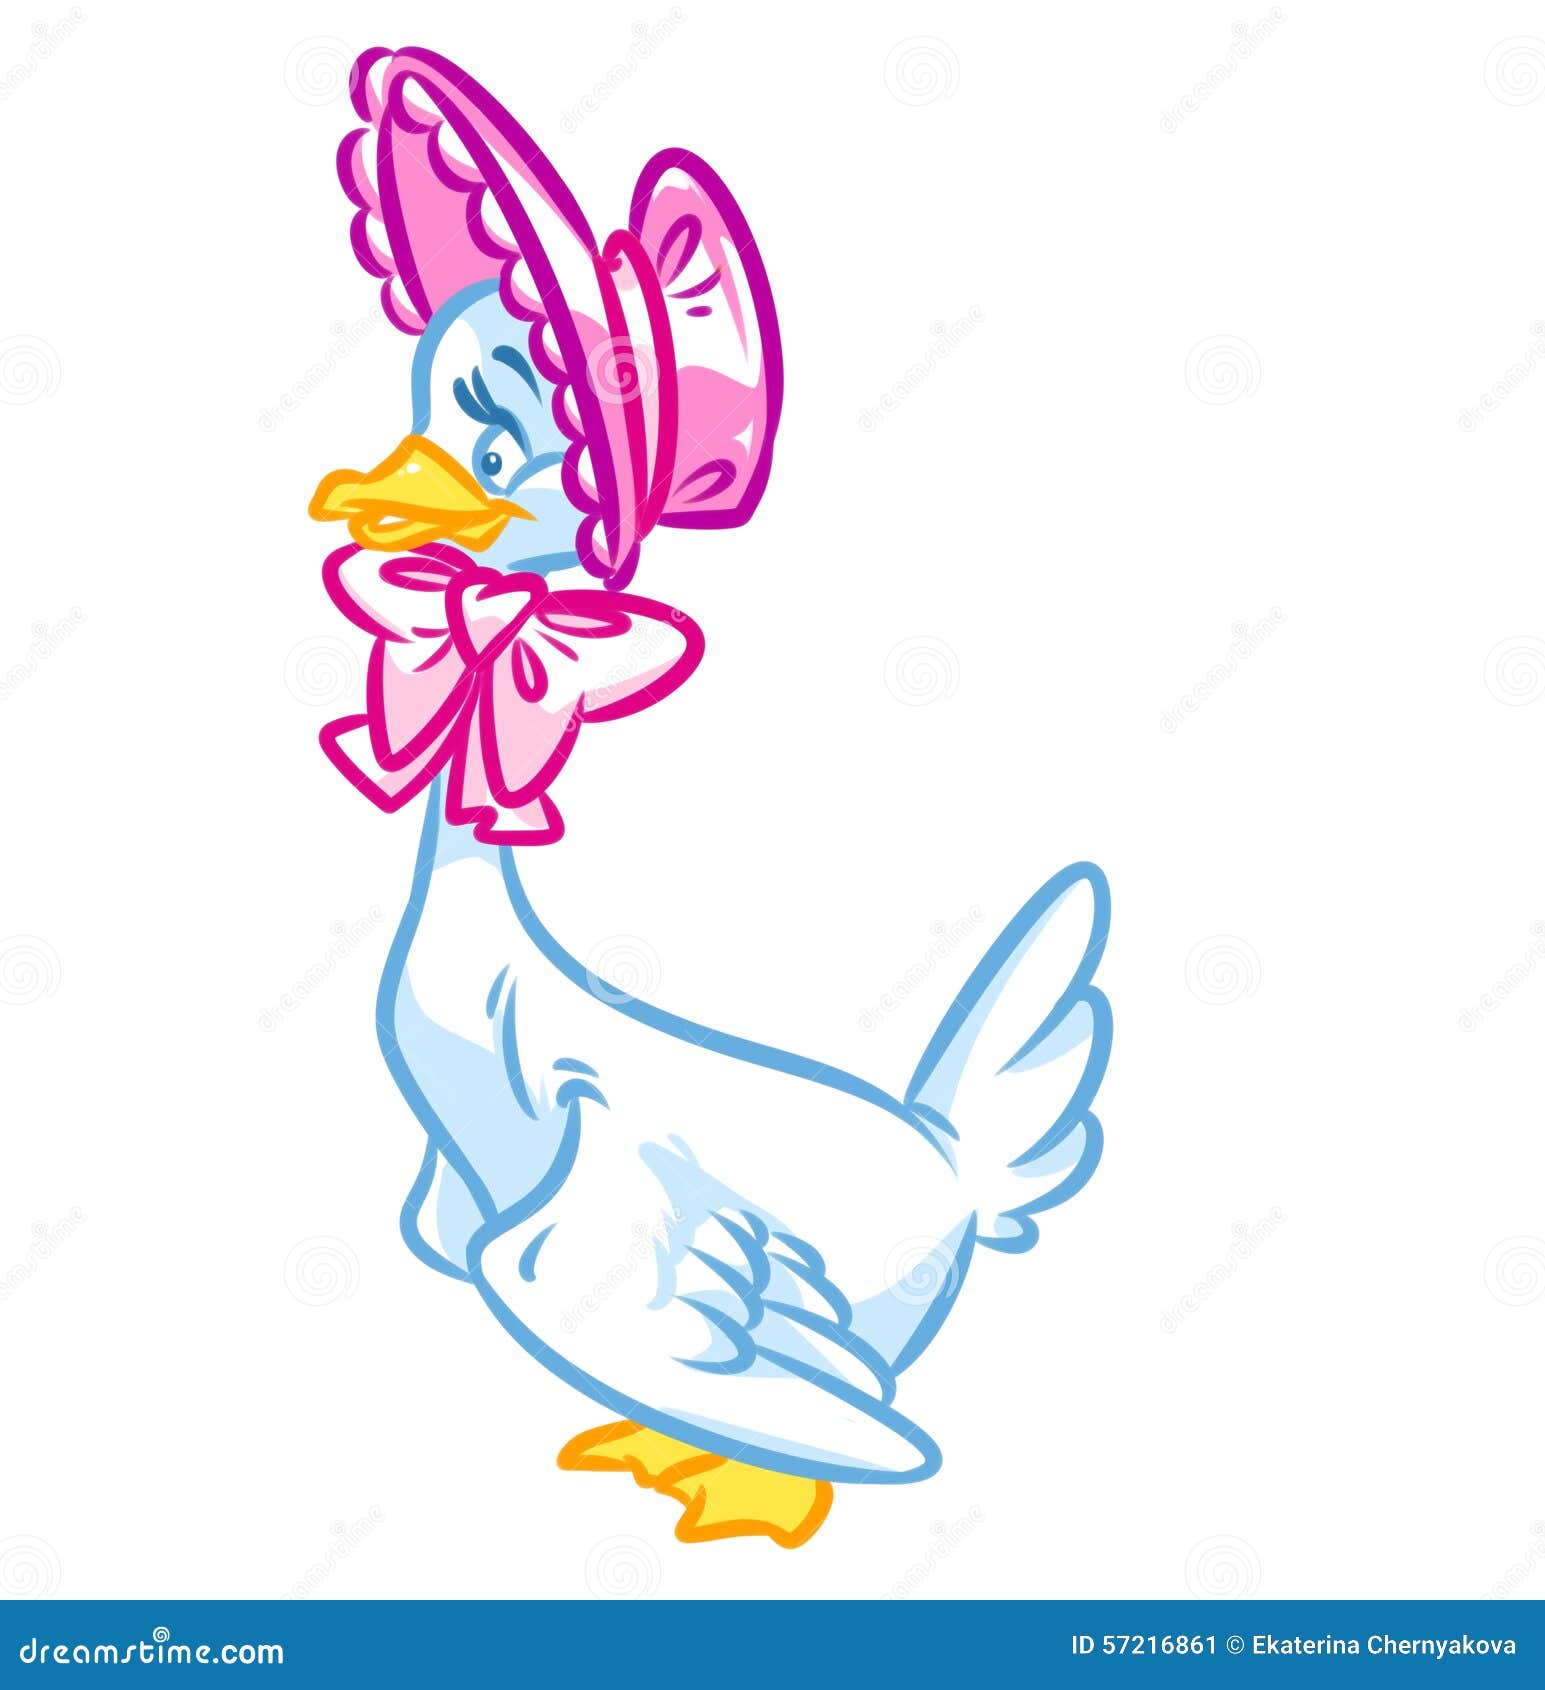 clip art of mother goose - photo #10